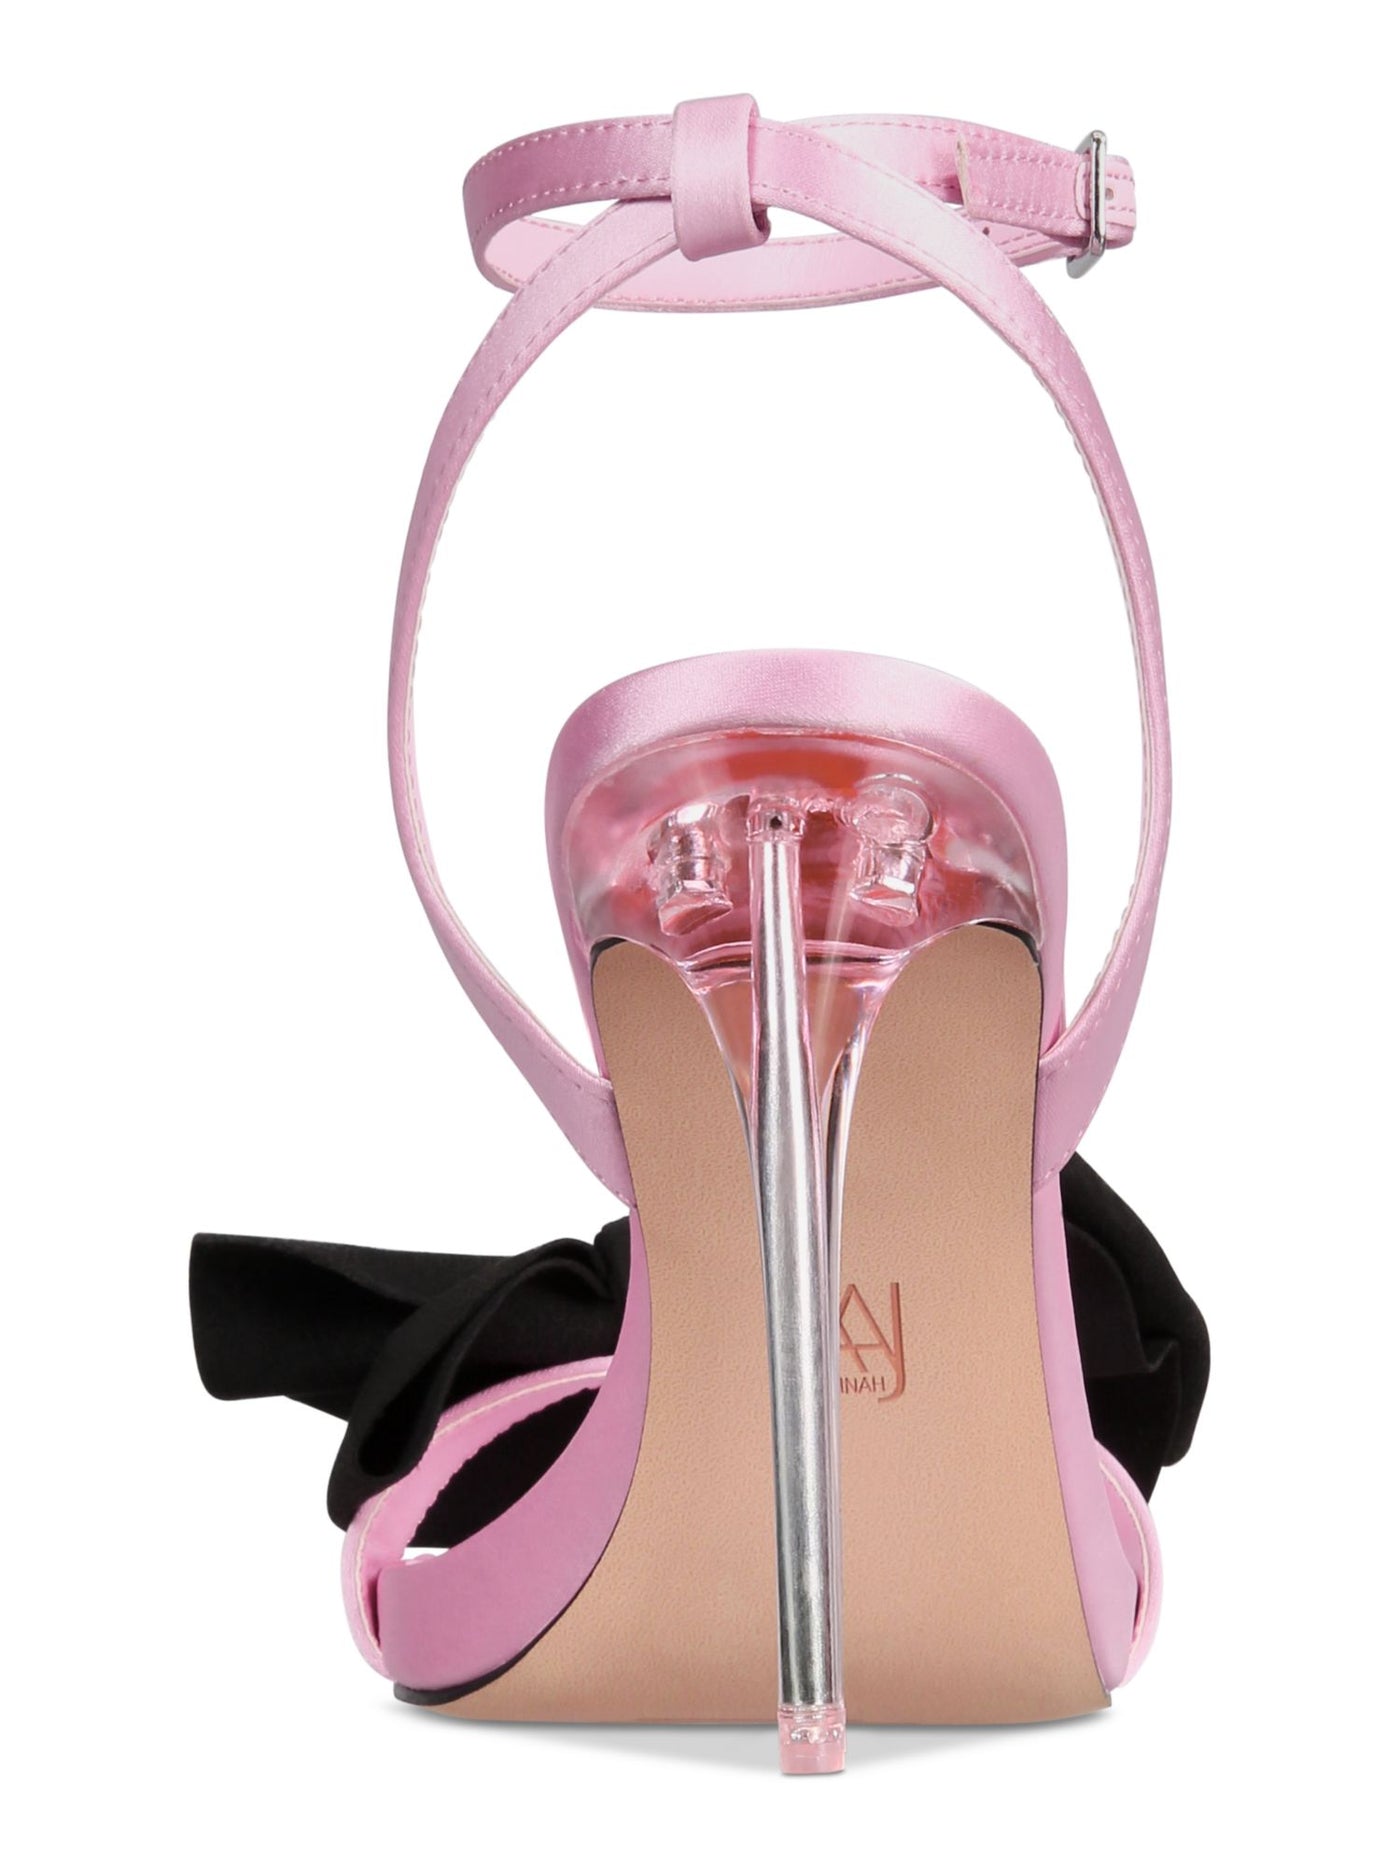 AAJ BY AMINAH Womens Pink Cushioned Bow Accent Ankle Strap Yahira Almond Toe Stiletto Buckle Dress Heeled Sandal 8 M